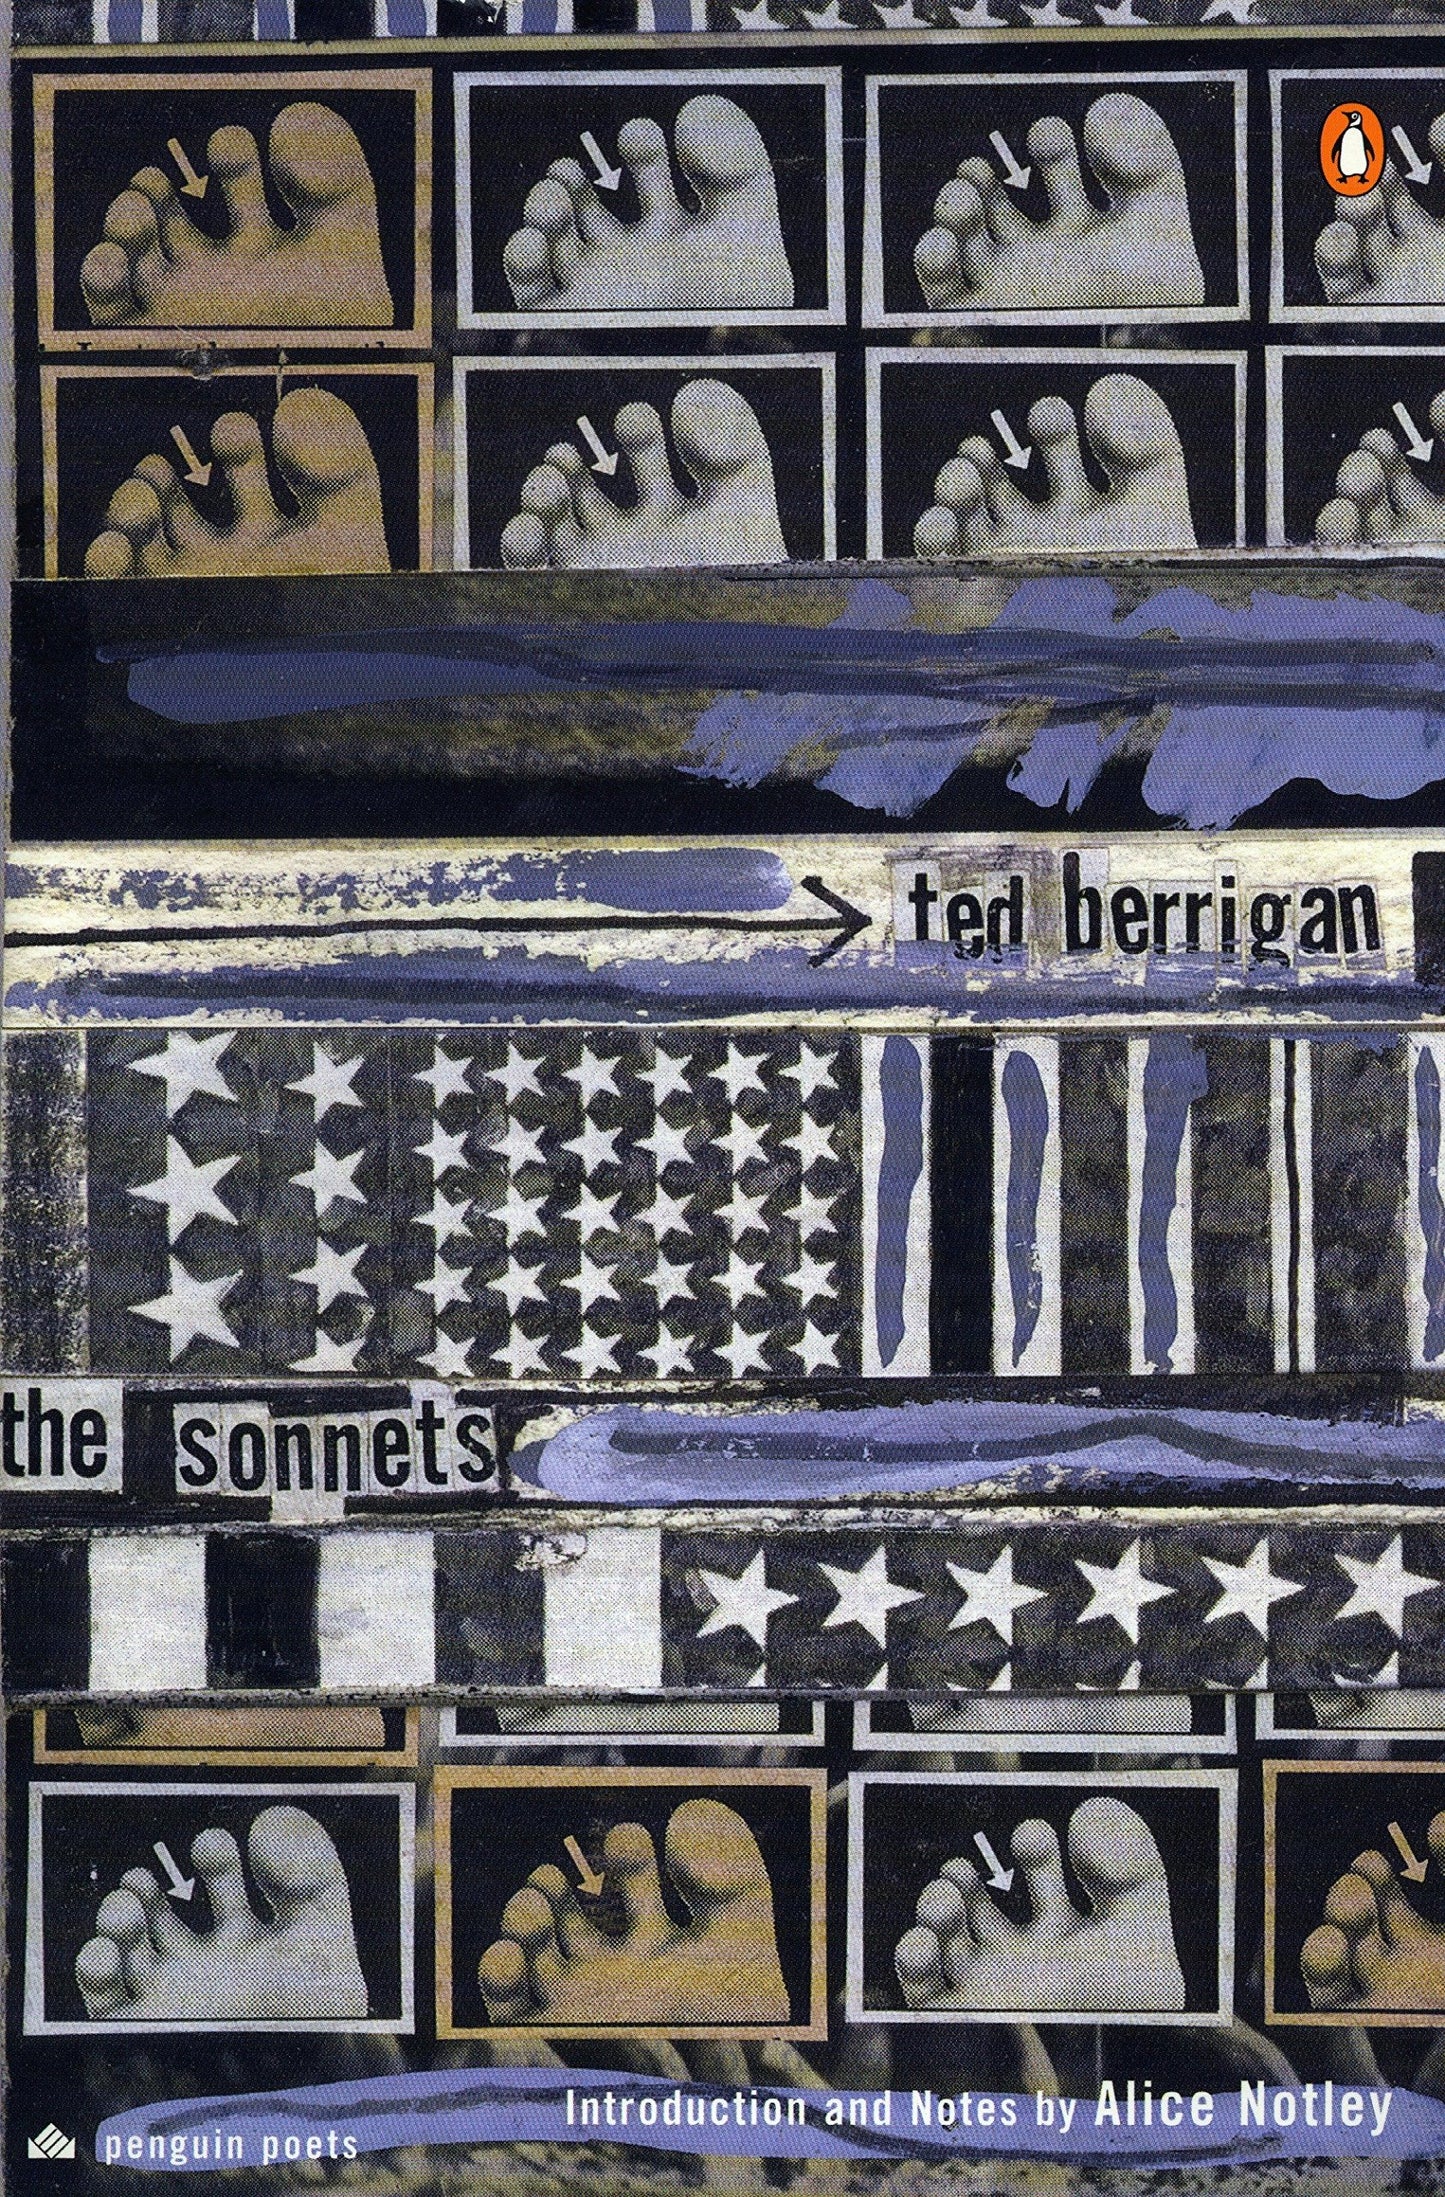 The Sonnets, by Ted Berrigan